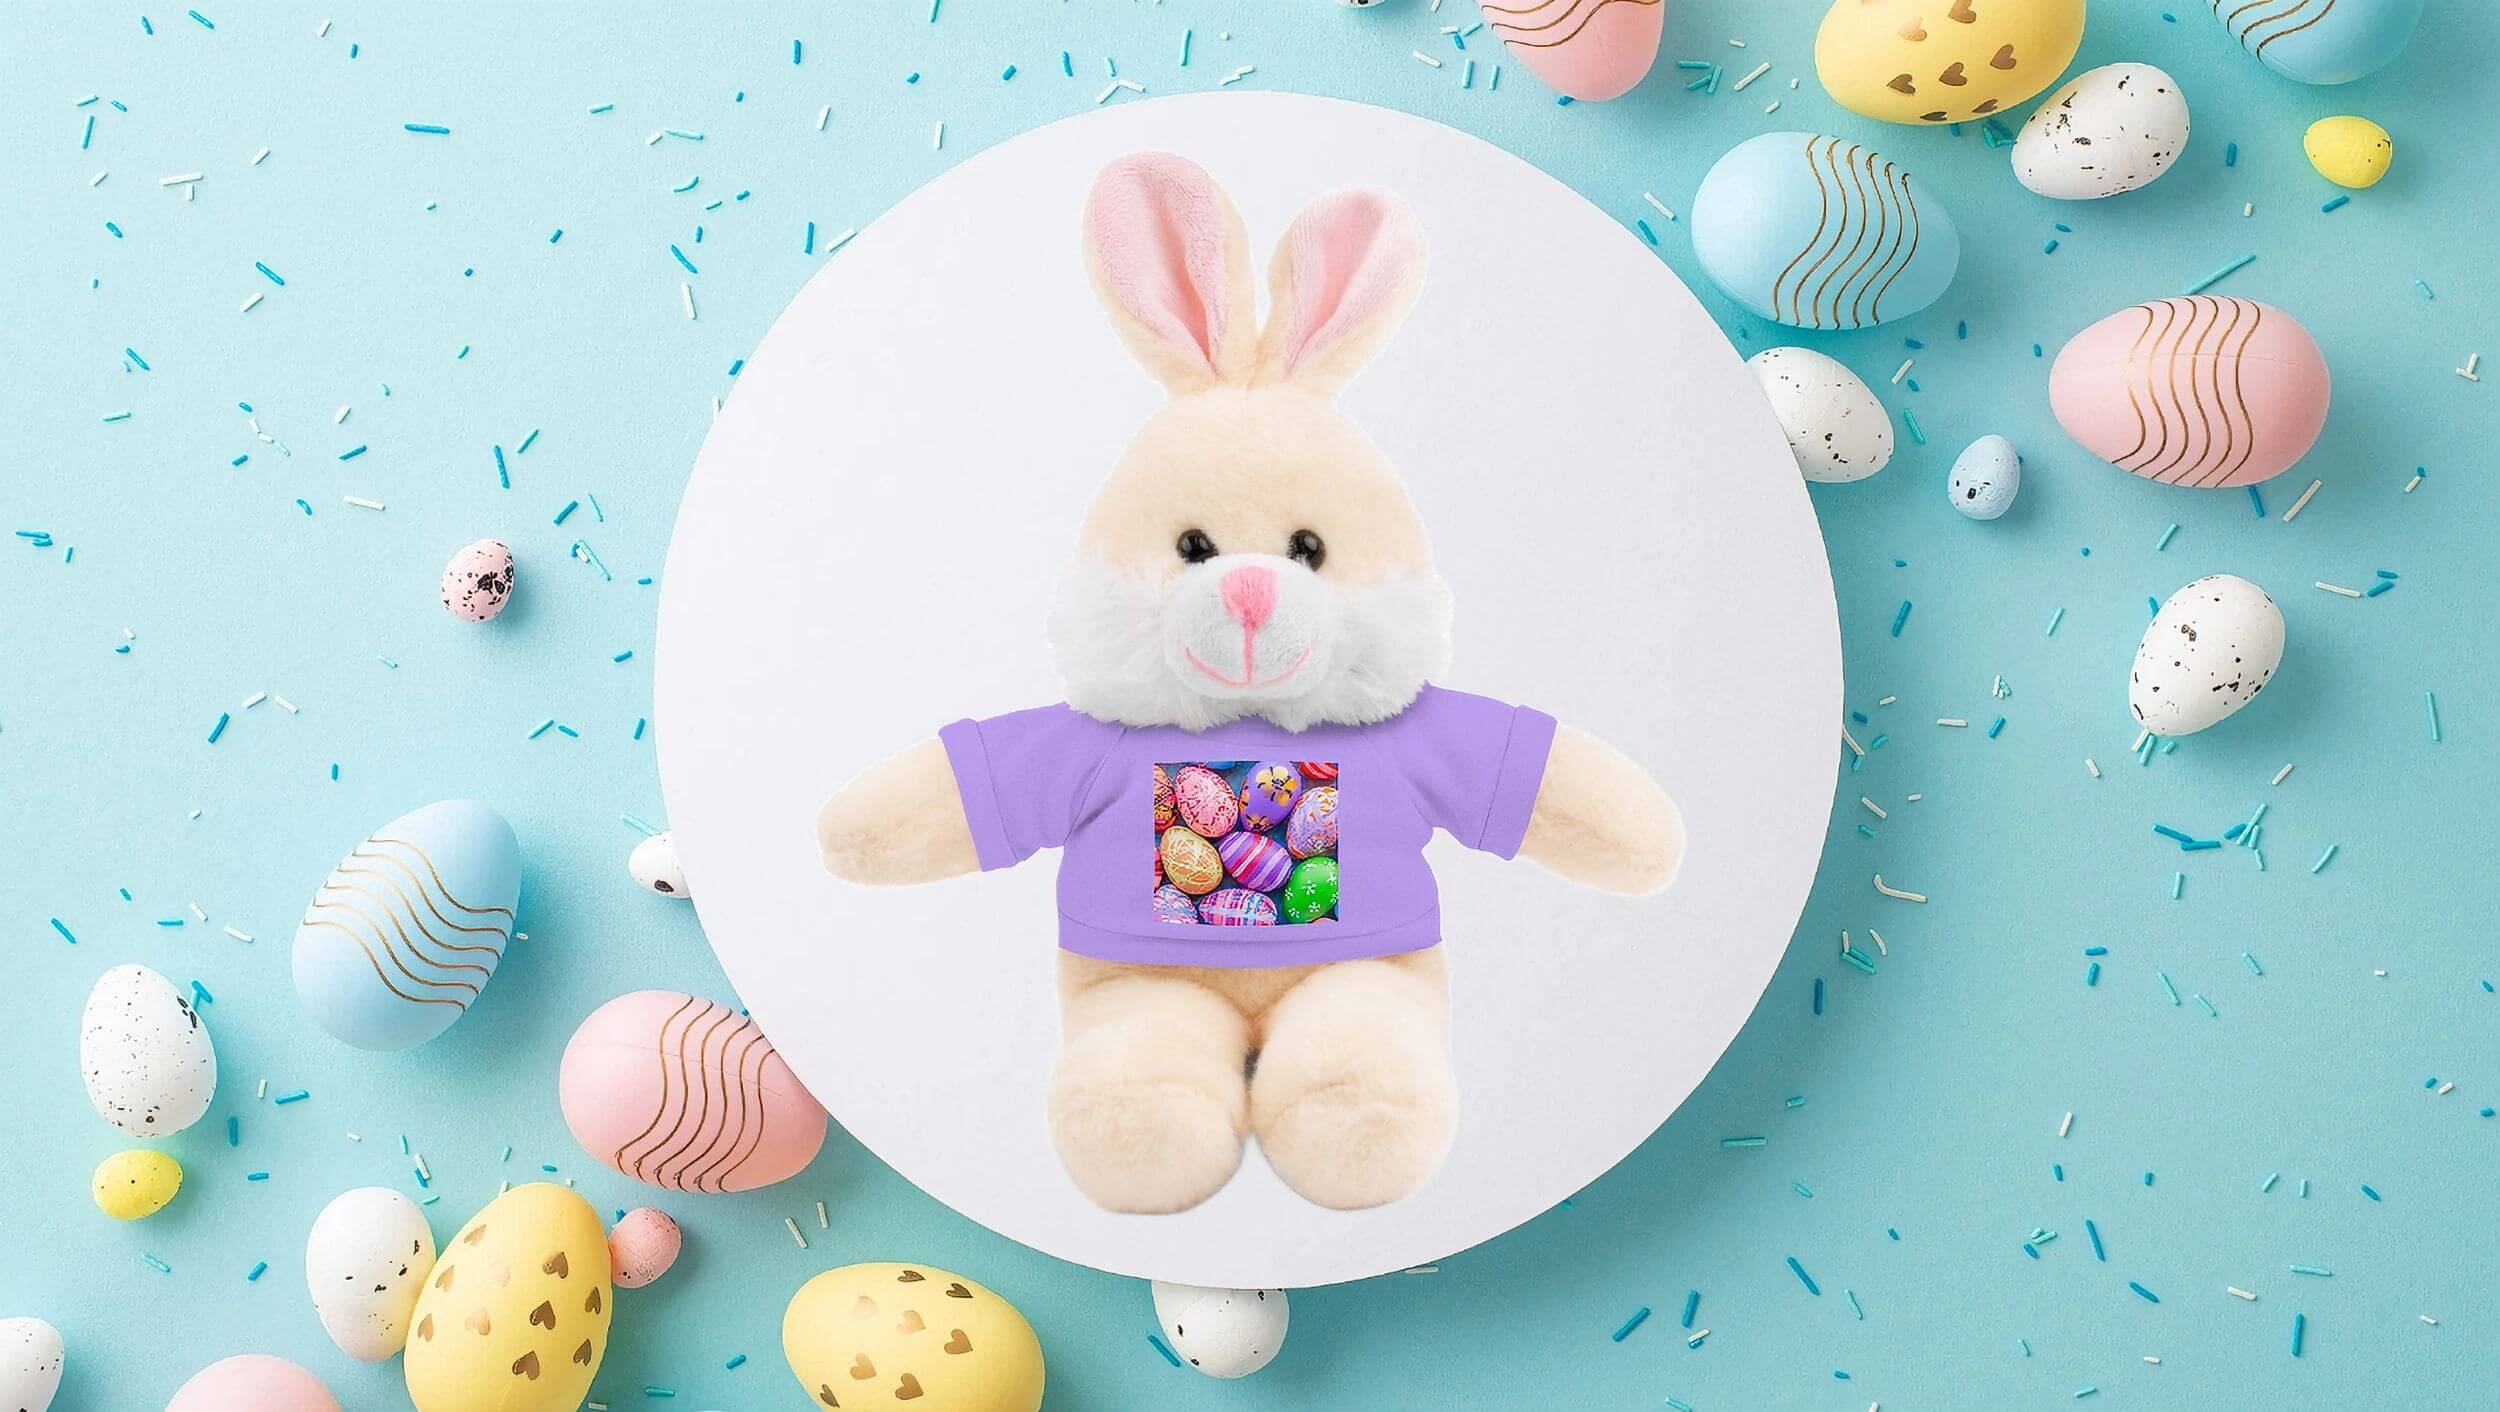 Bunny Stuffed Animals and Other Plush Toys for Easter